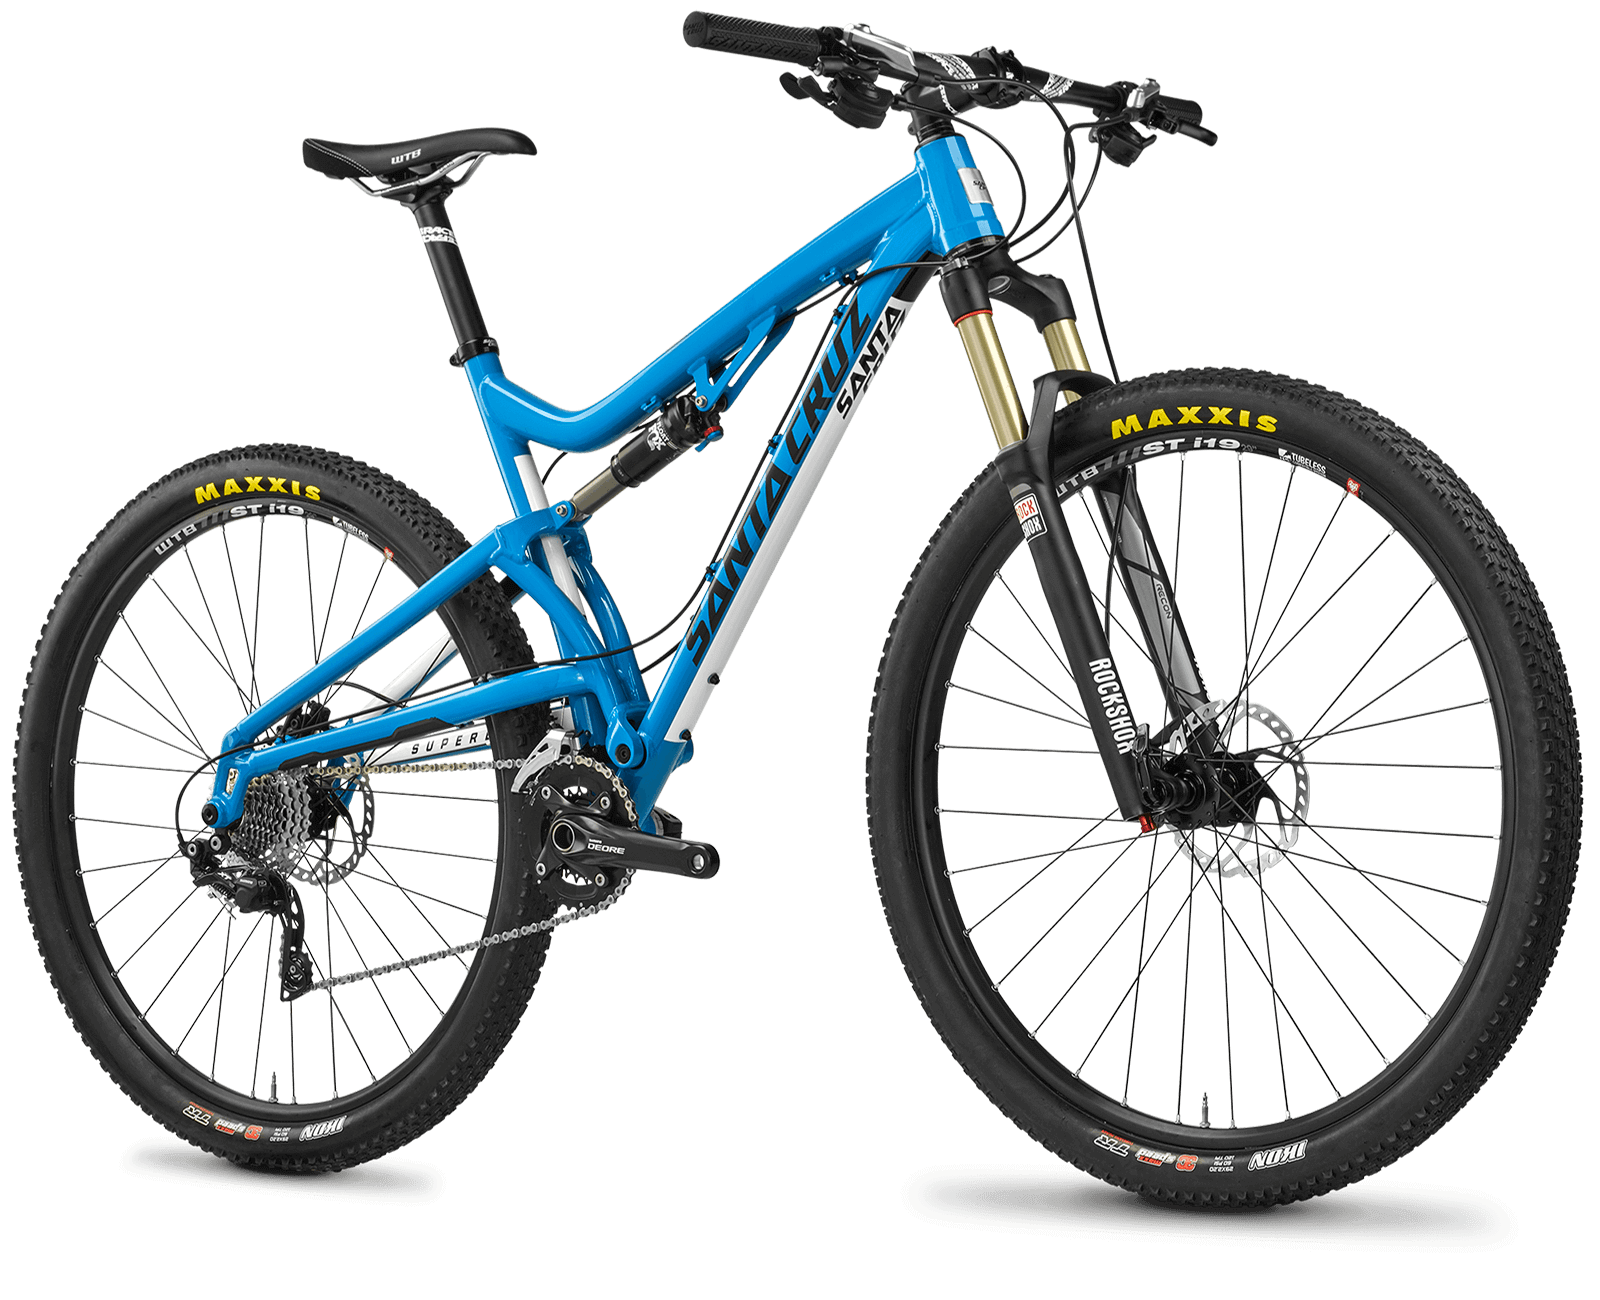 Png images free bikes. Cycle clipart blue bicycle